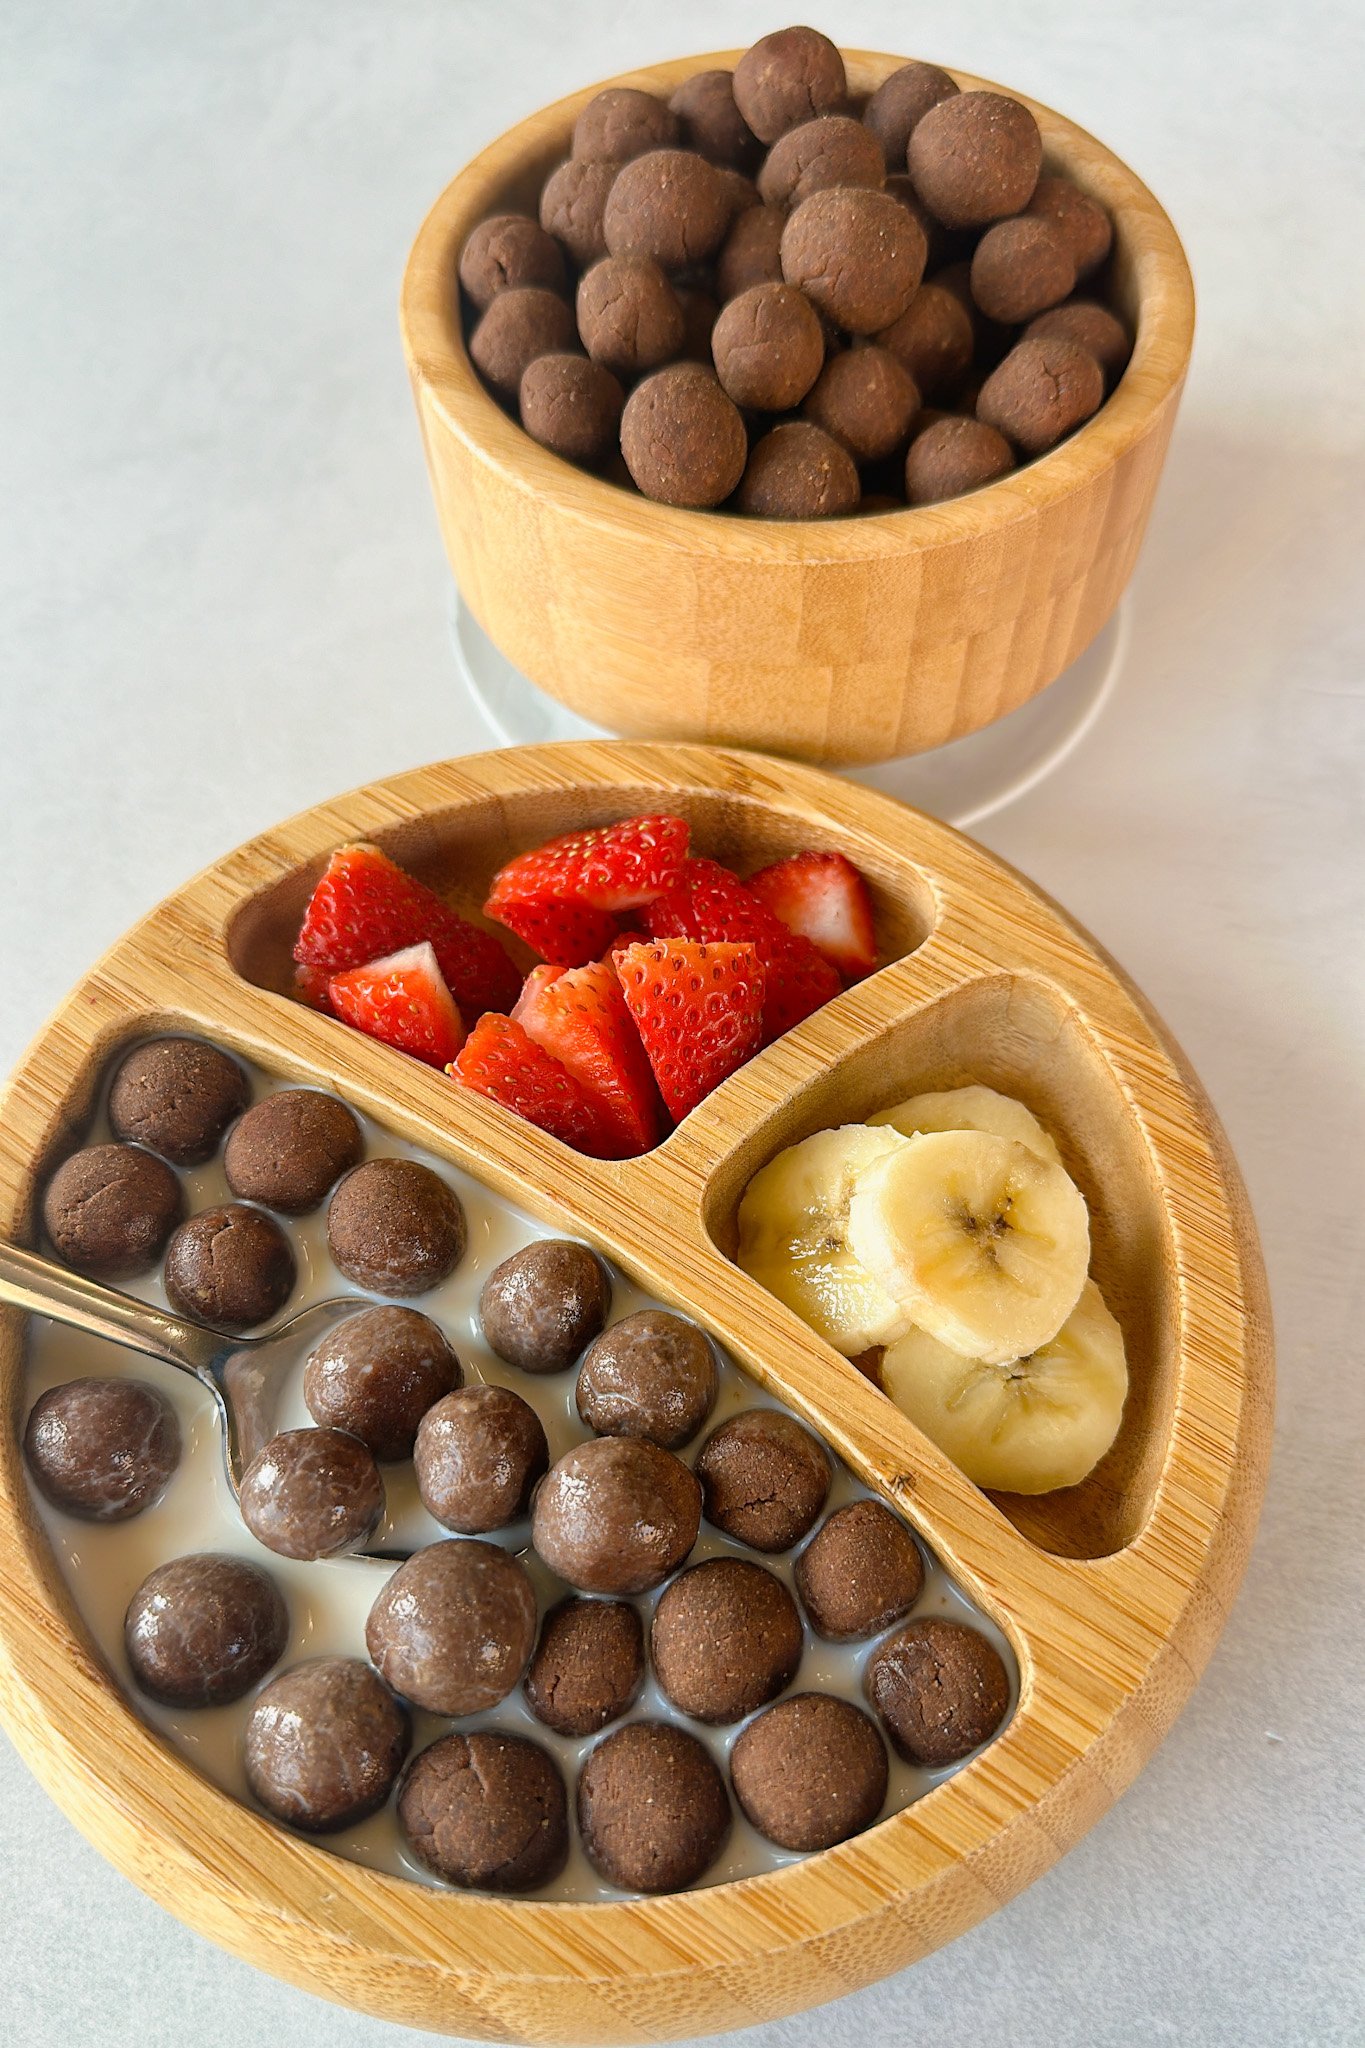 Cocoa puffs cereal served with strawberries and bananas.